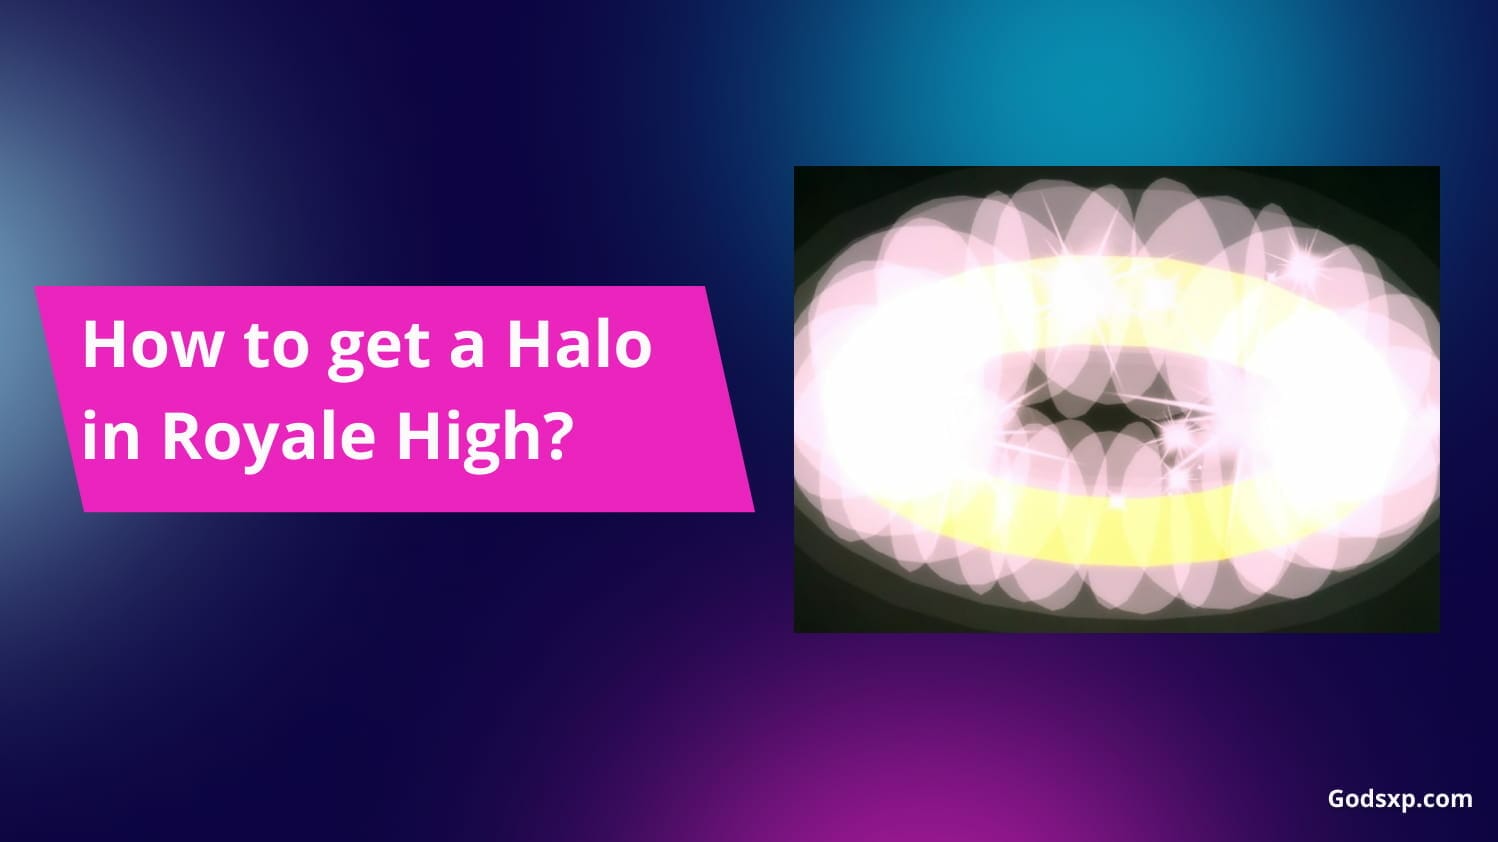 2023 Royale high valentines halo answers 2023 the to 